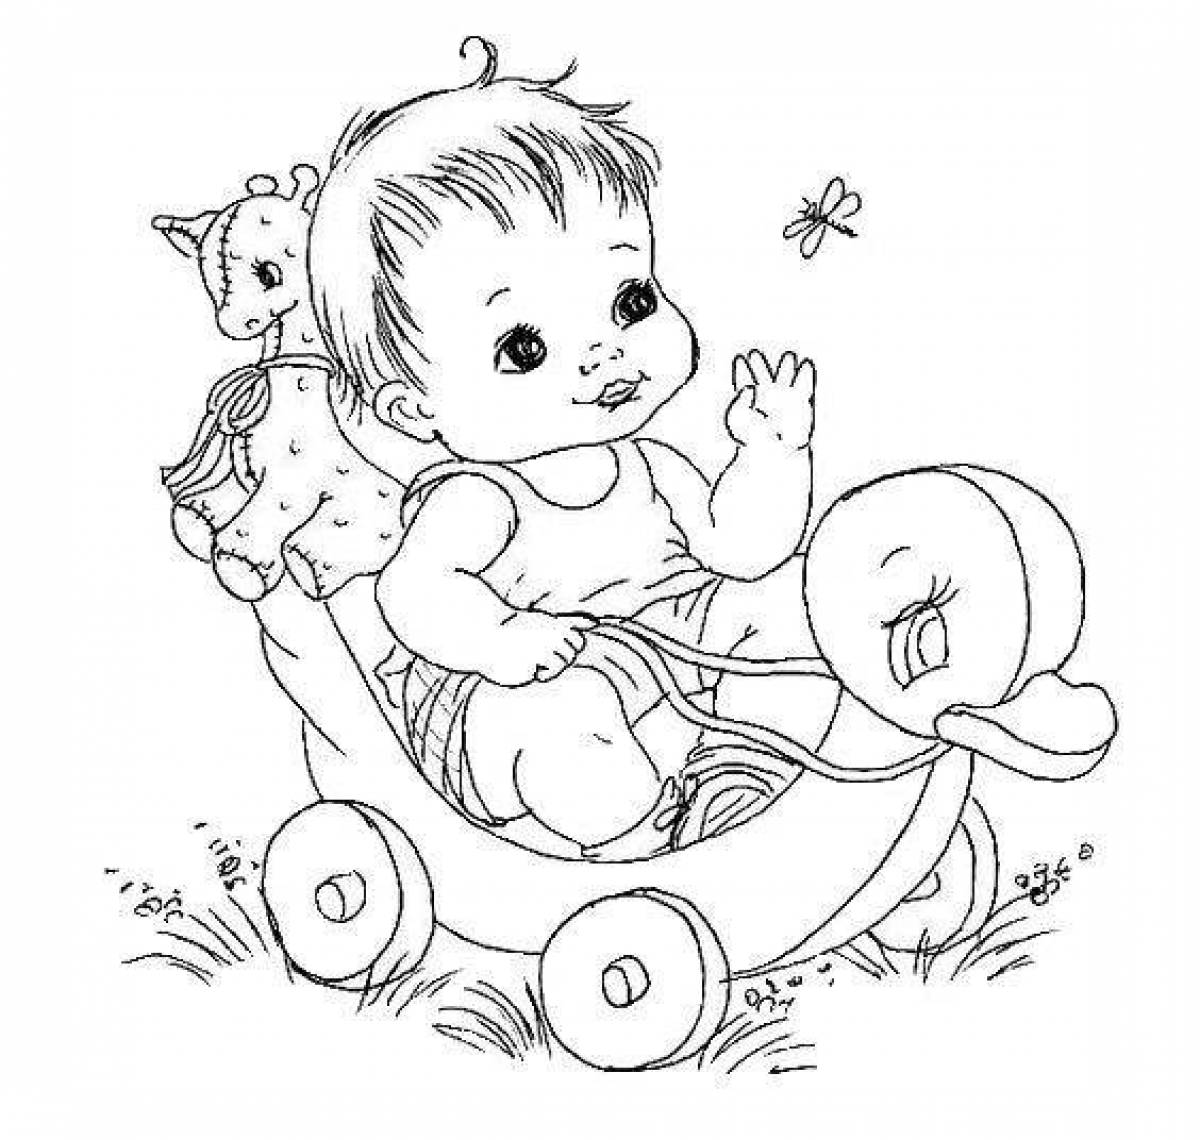 Exquisite baby born coloring book